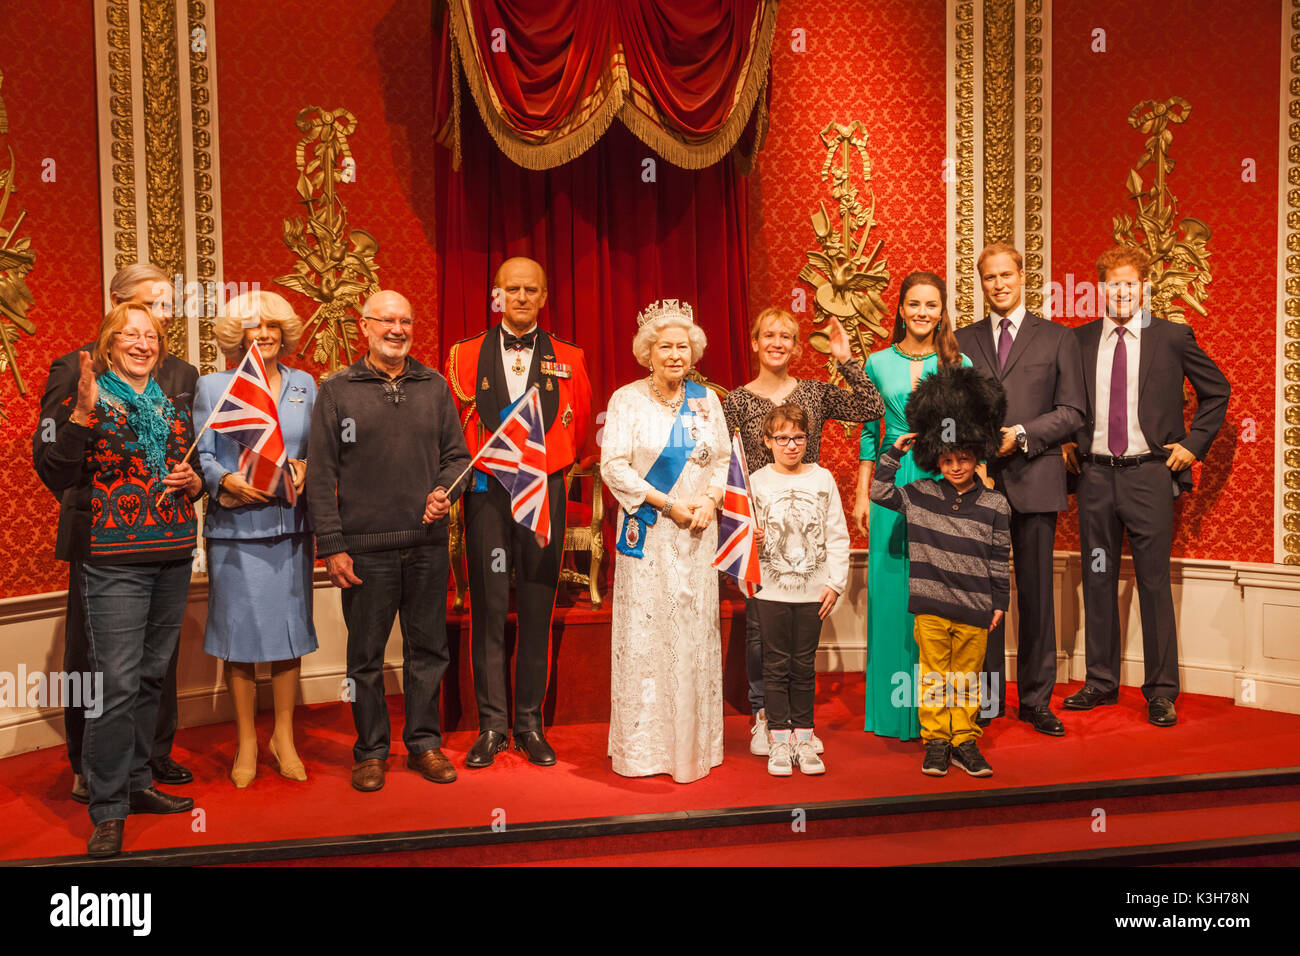 England, London, Madame Tussauds, Tourists Posing with Wax Figures of The Queen and Royal Family Stock Photo